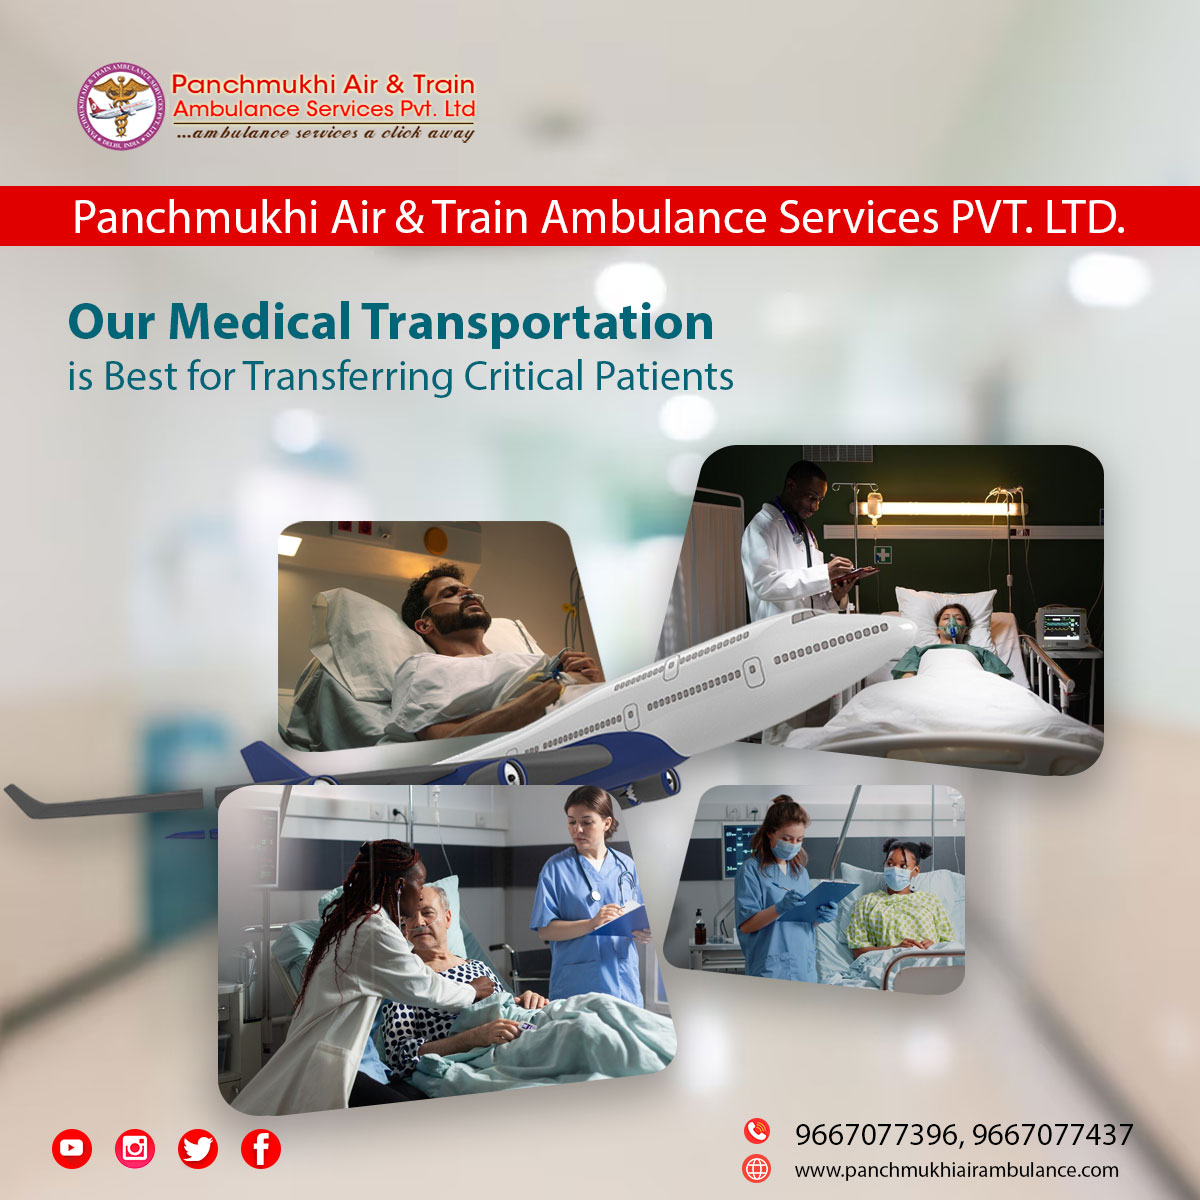 Panchmukhi Air and Train Ambulance Services in Ranchi is Offering Life Support Medical Flights